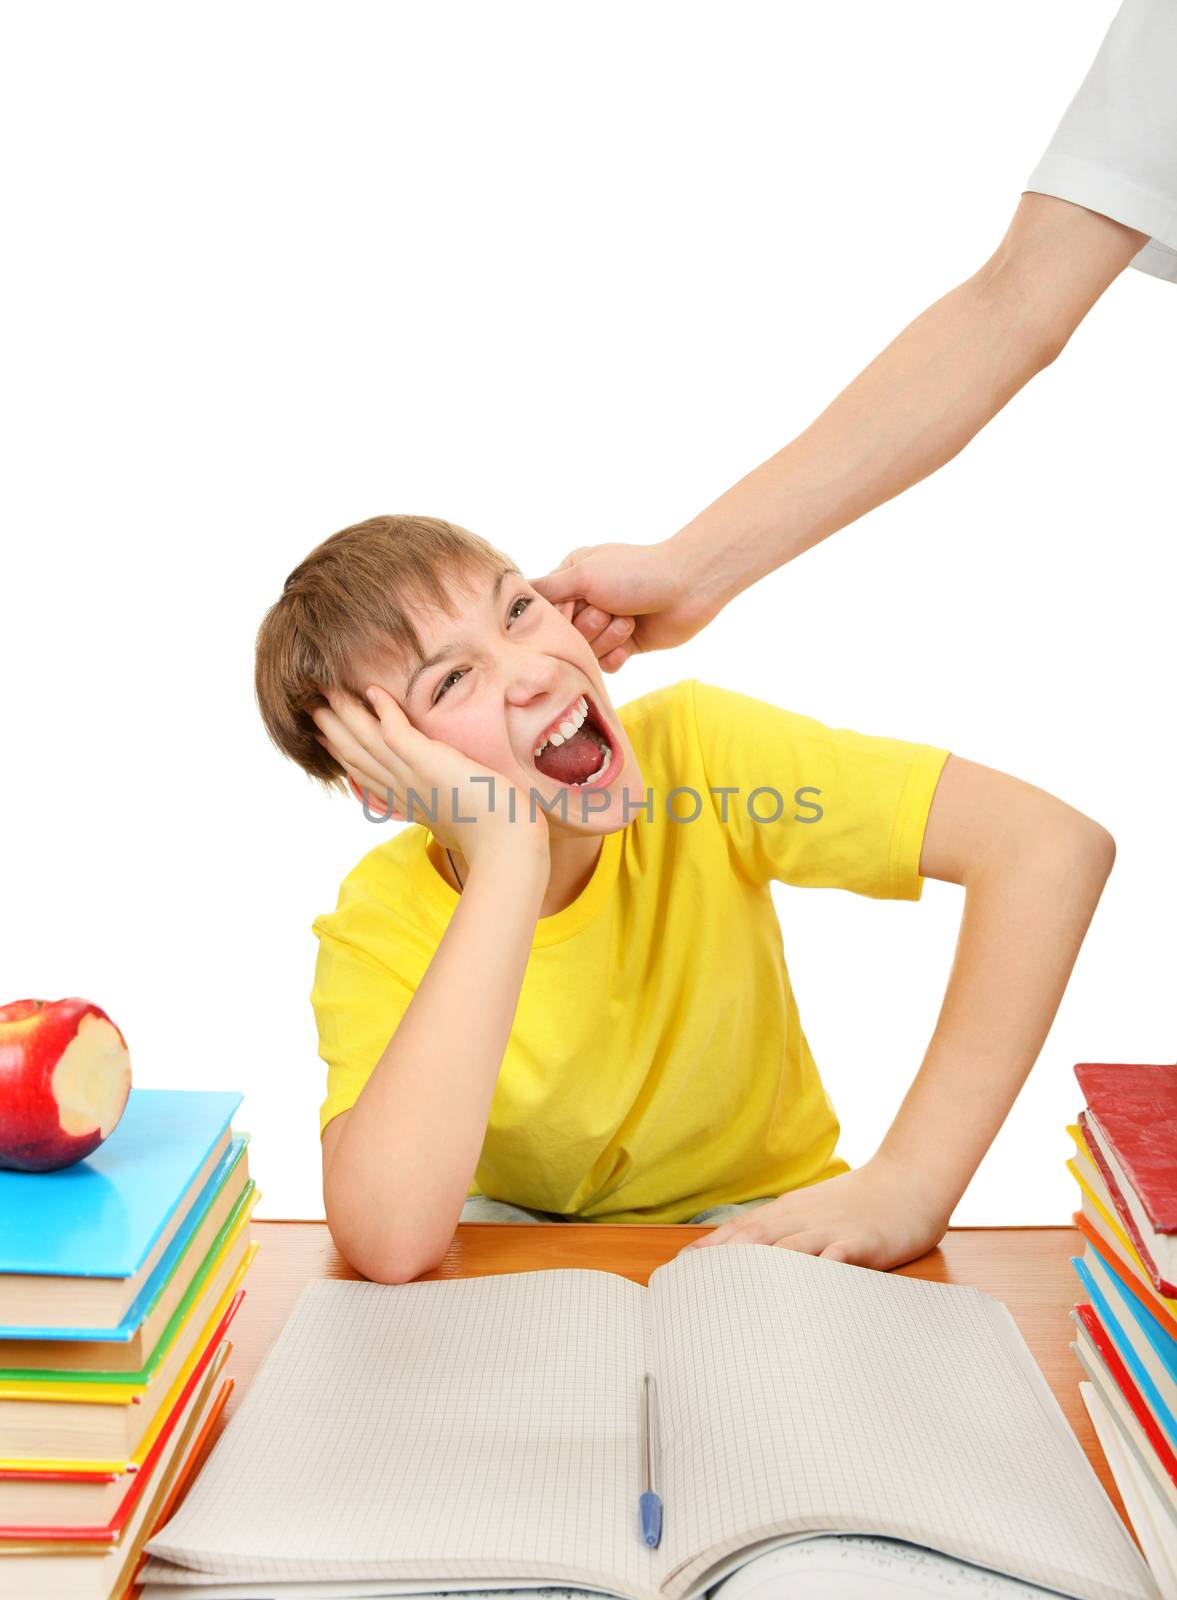 Parent threatening Son for a Learning on the white background